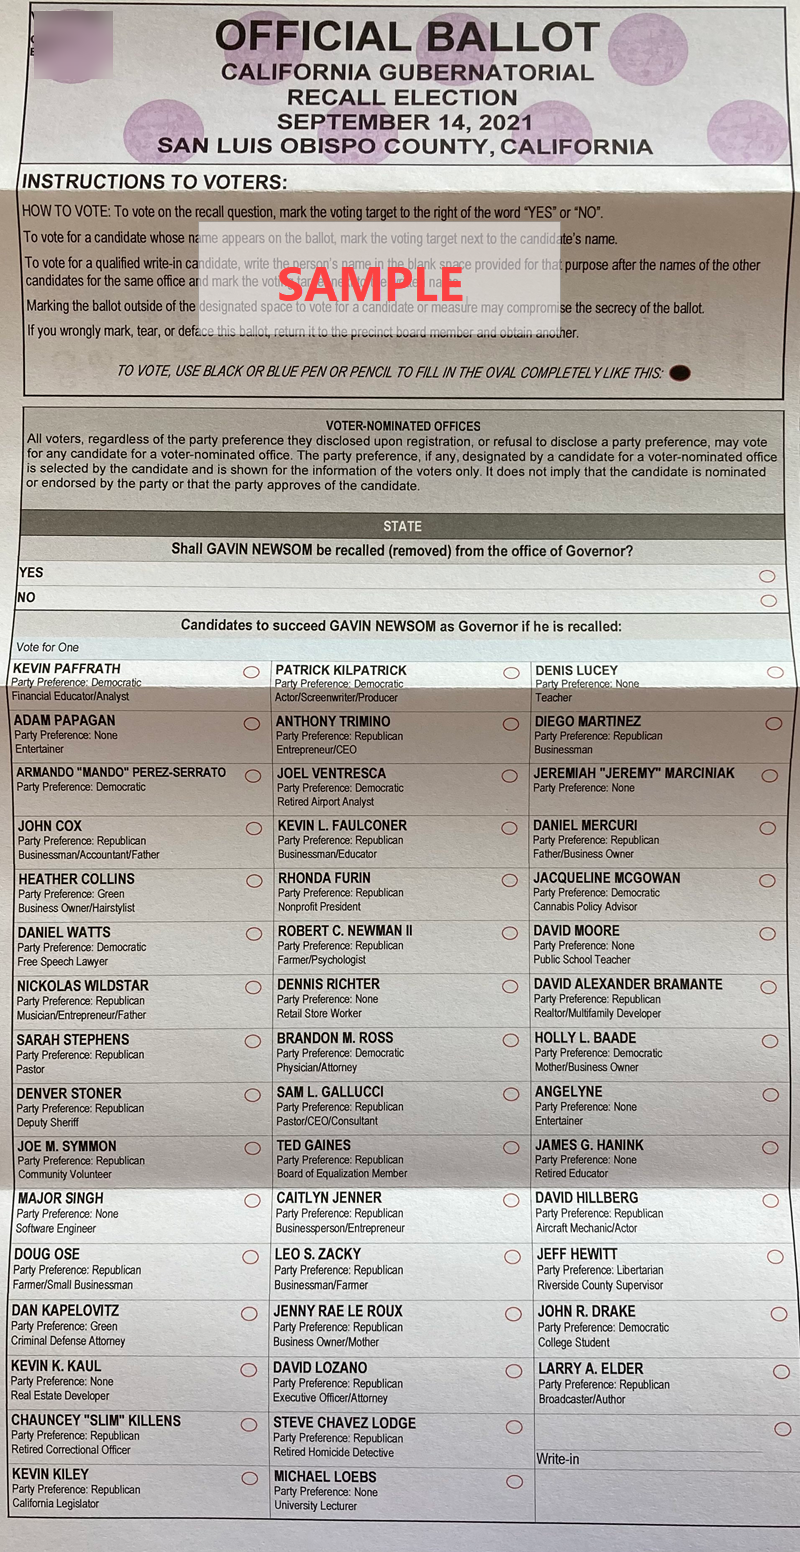 State Voters Guide And Overview Of California Recall Election